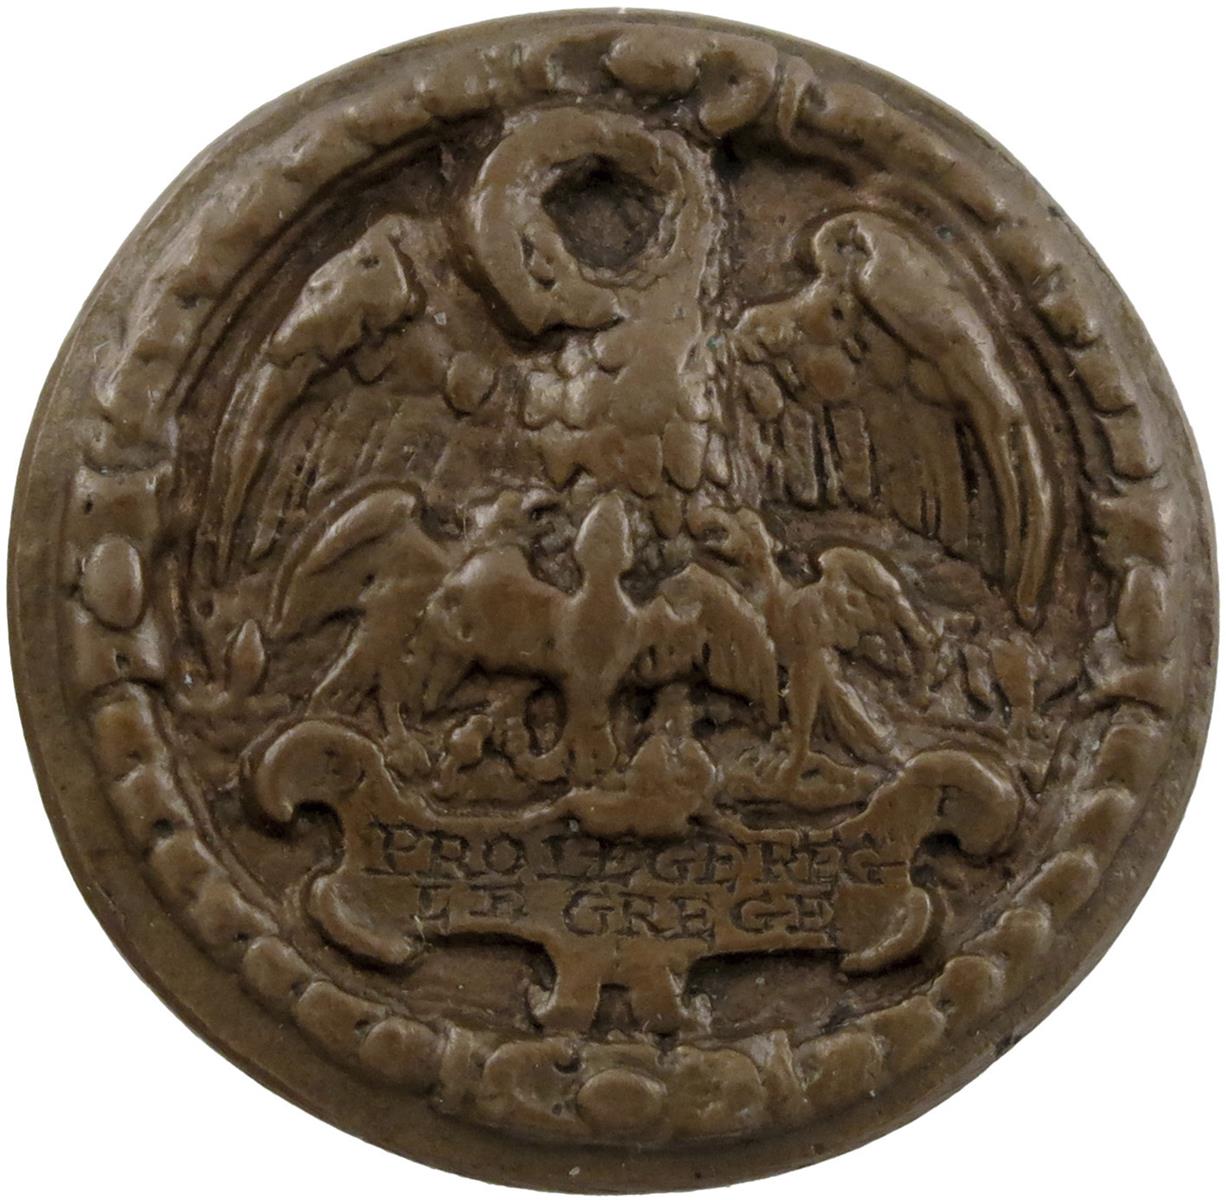 Philip II of Spain and King of England, Military Reward, cast bronze medal, 1556, by Gianpaolo - Image 2 of 2